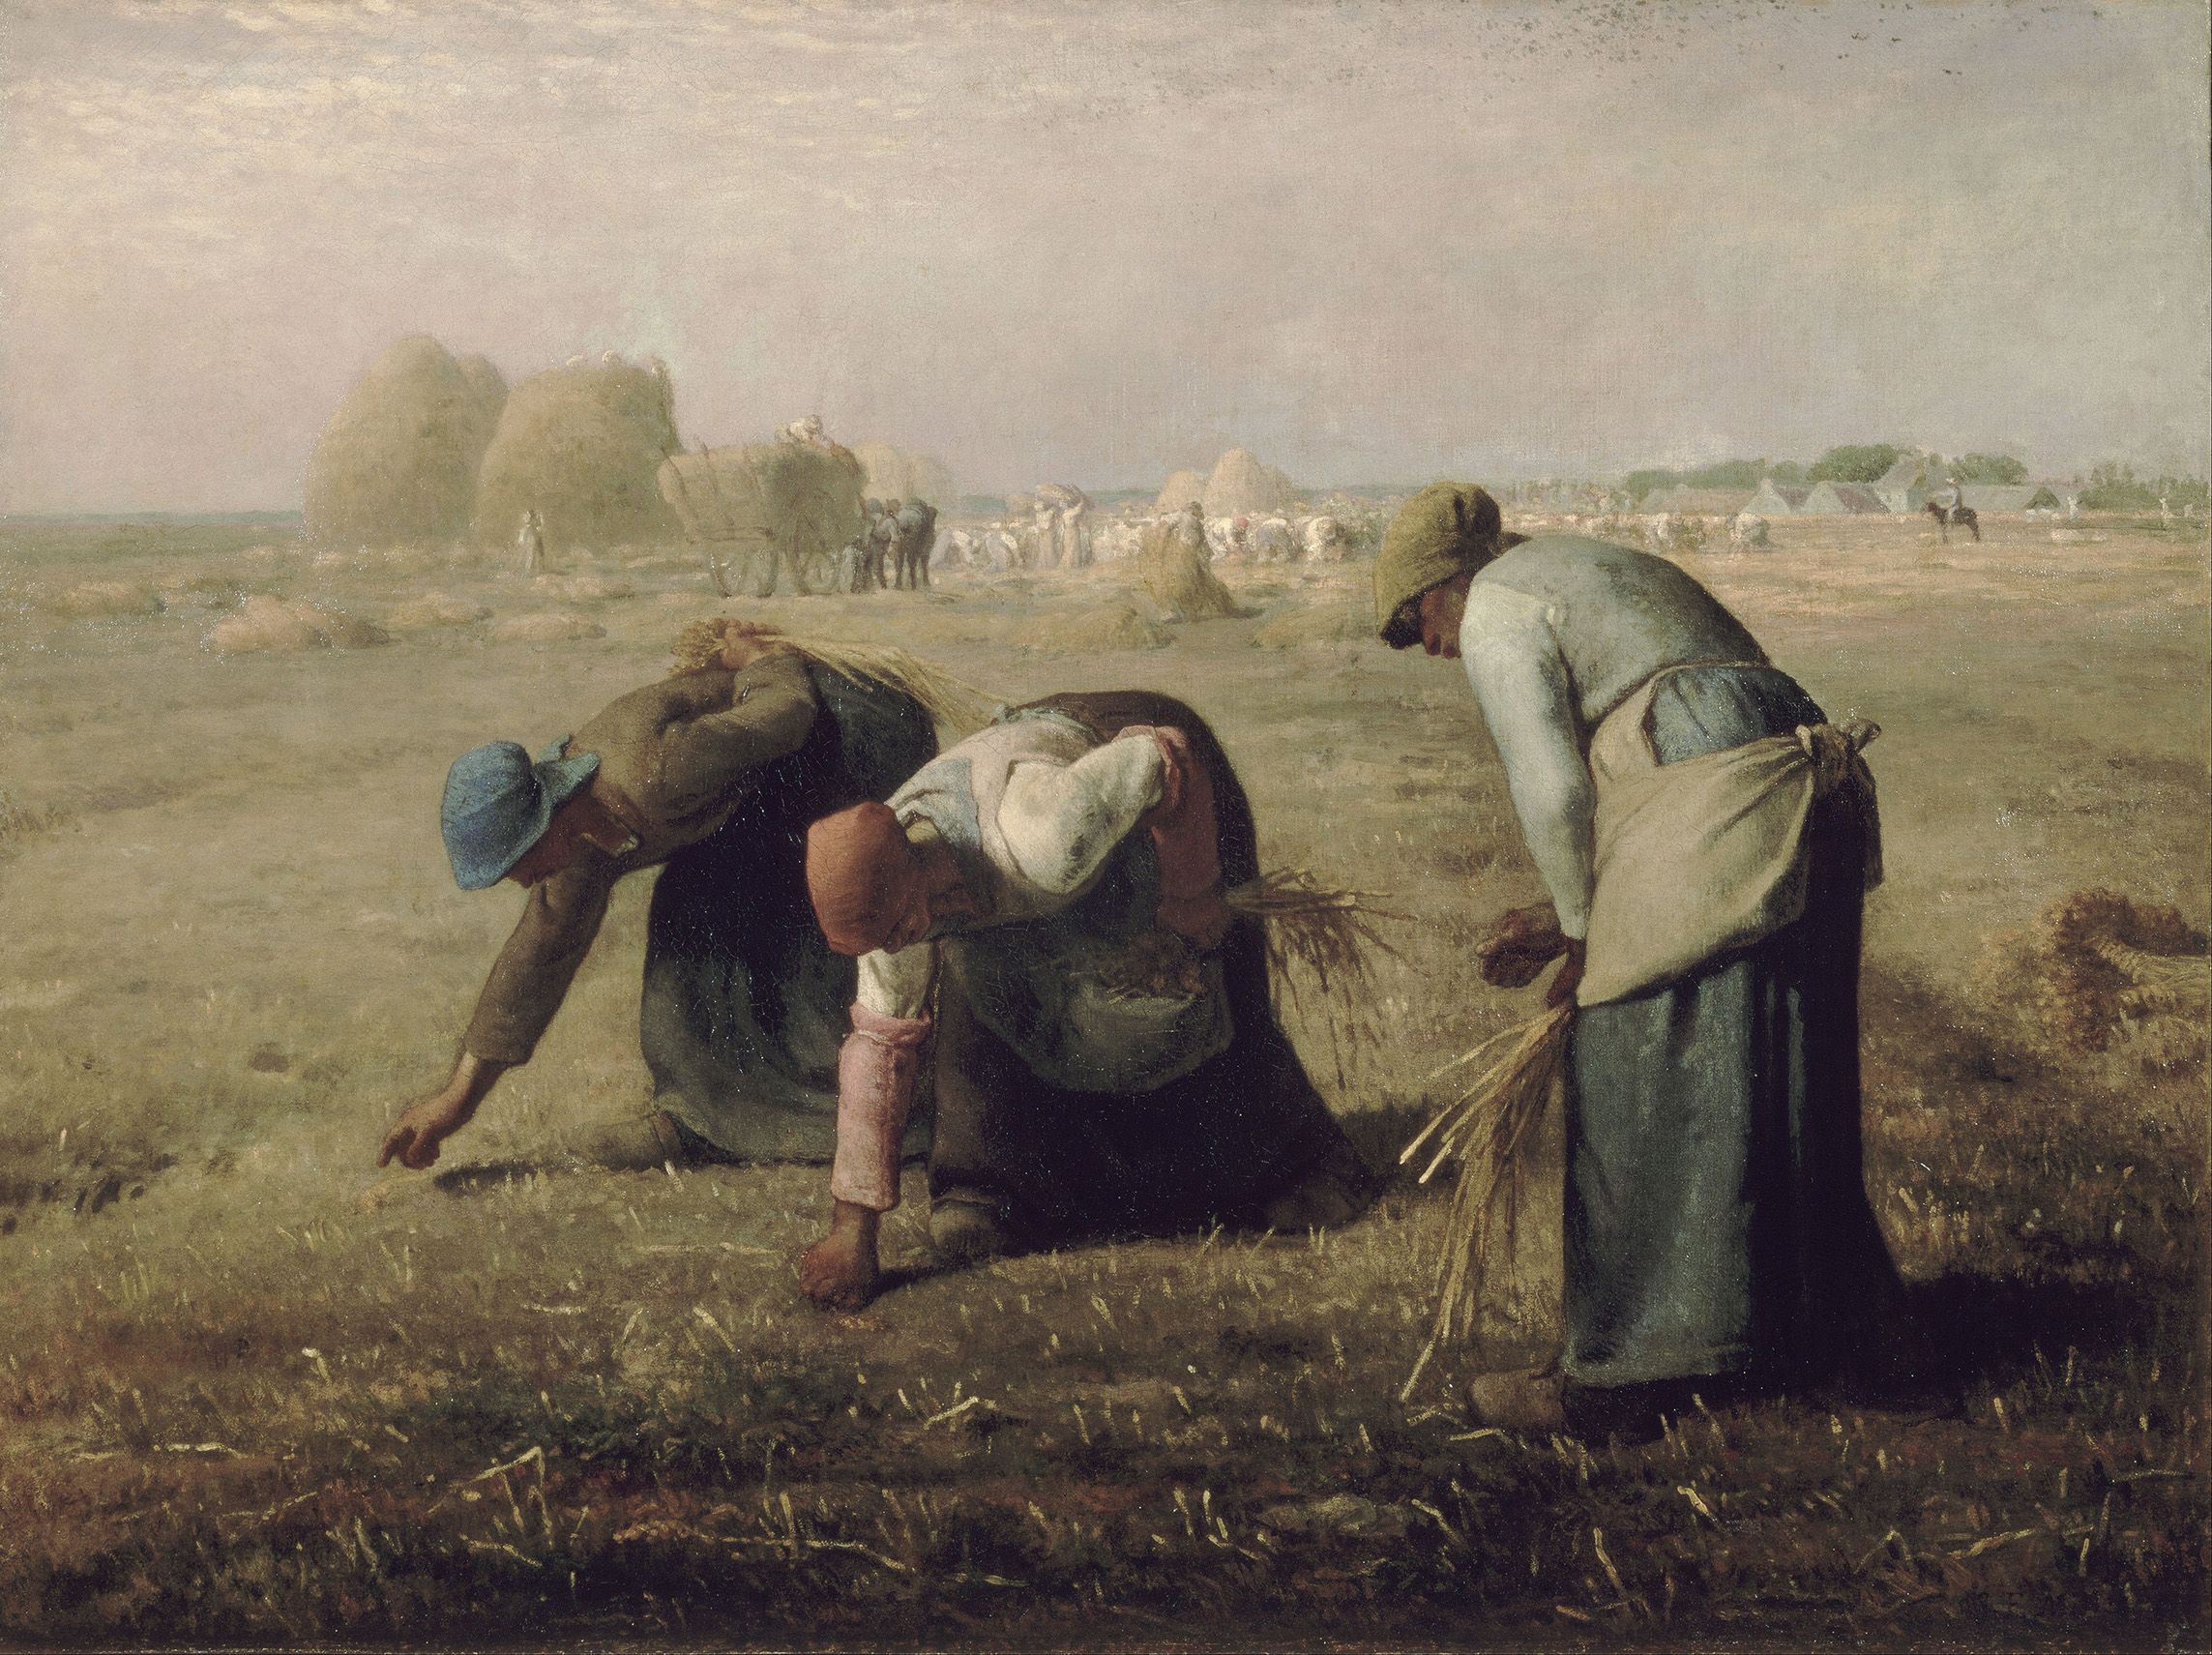 Millet's The Gleaners